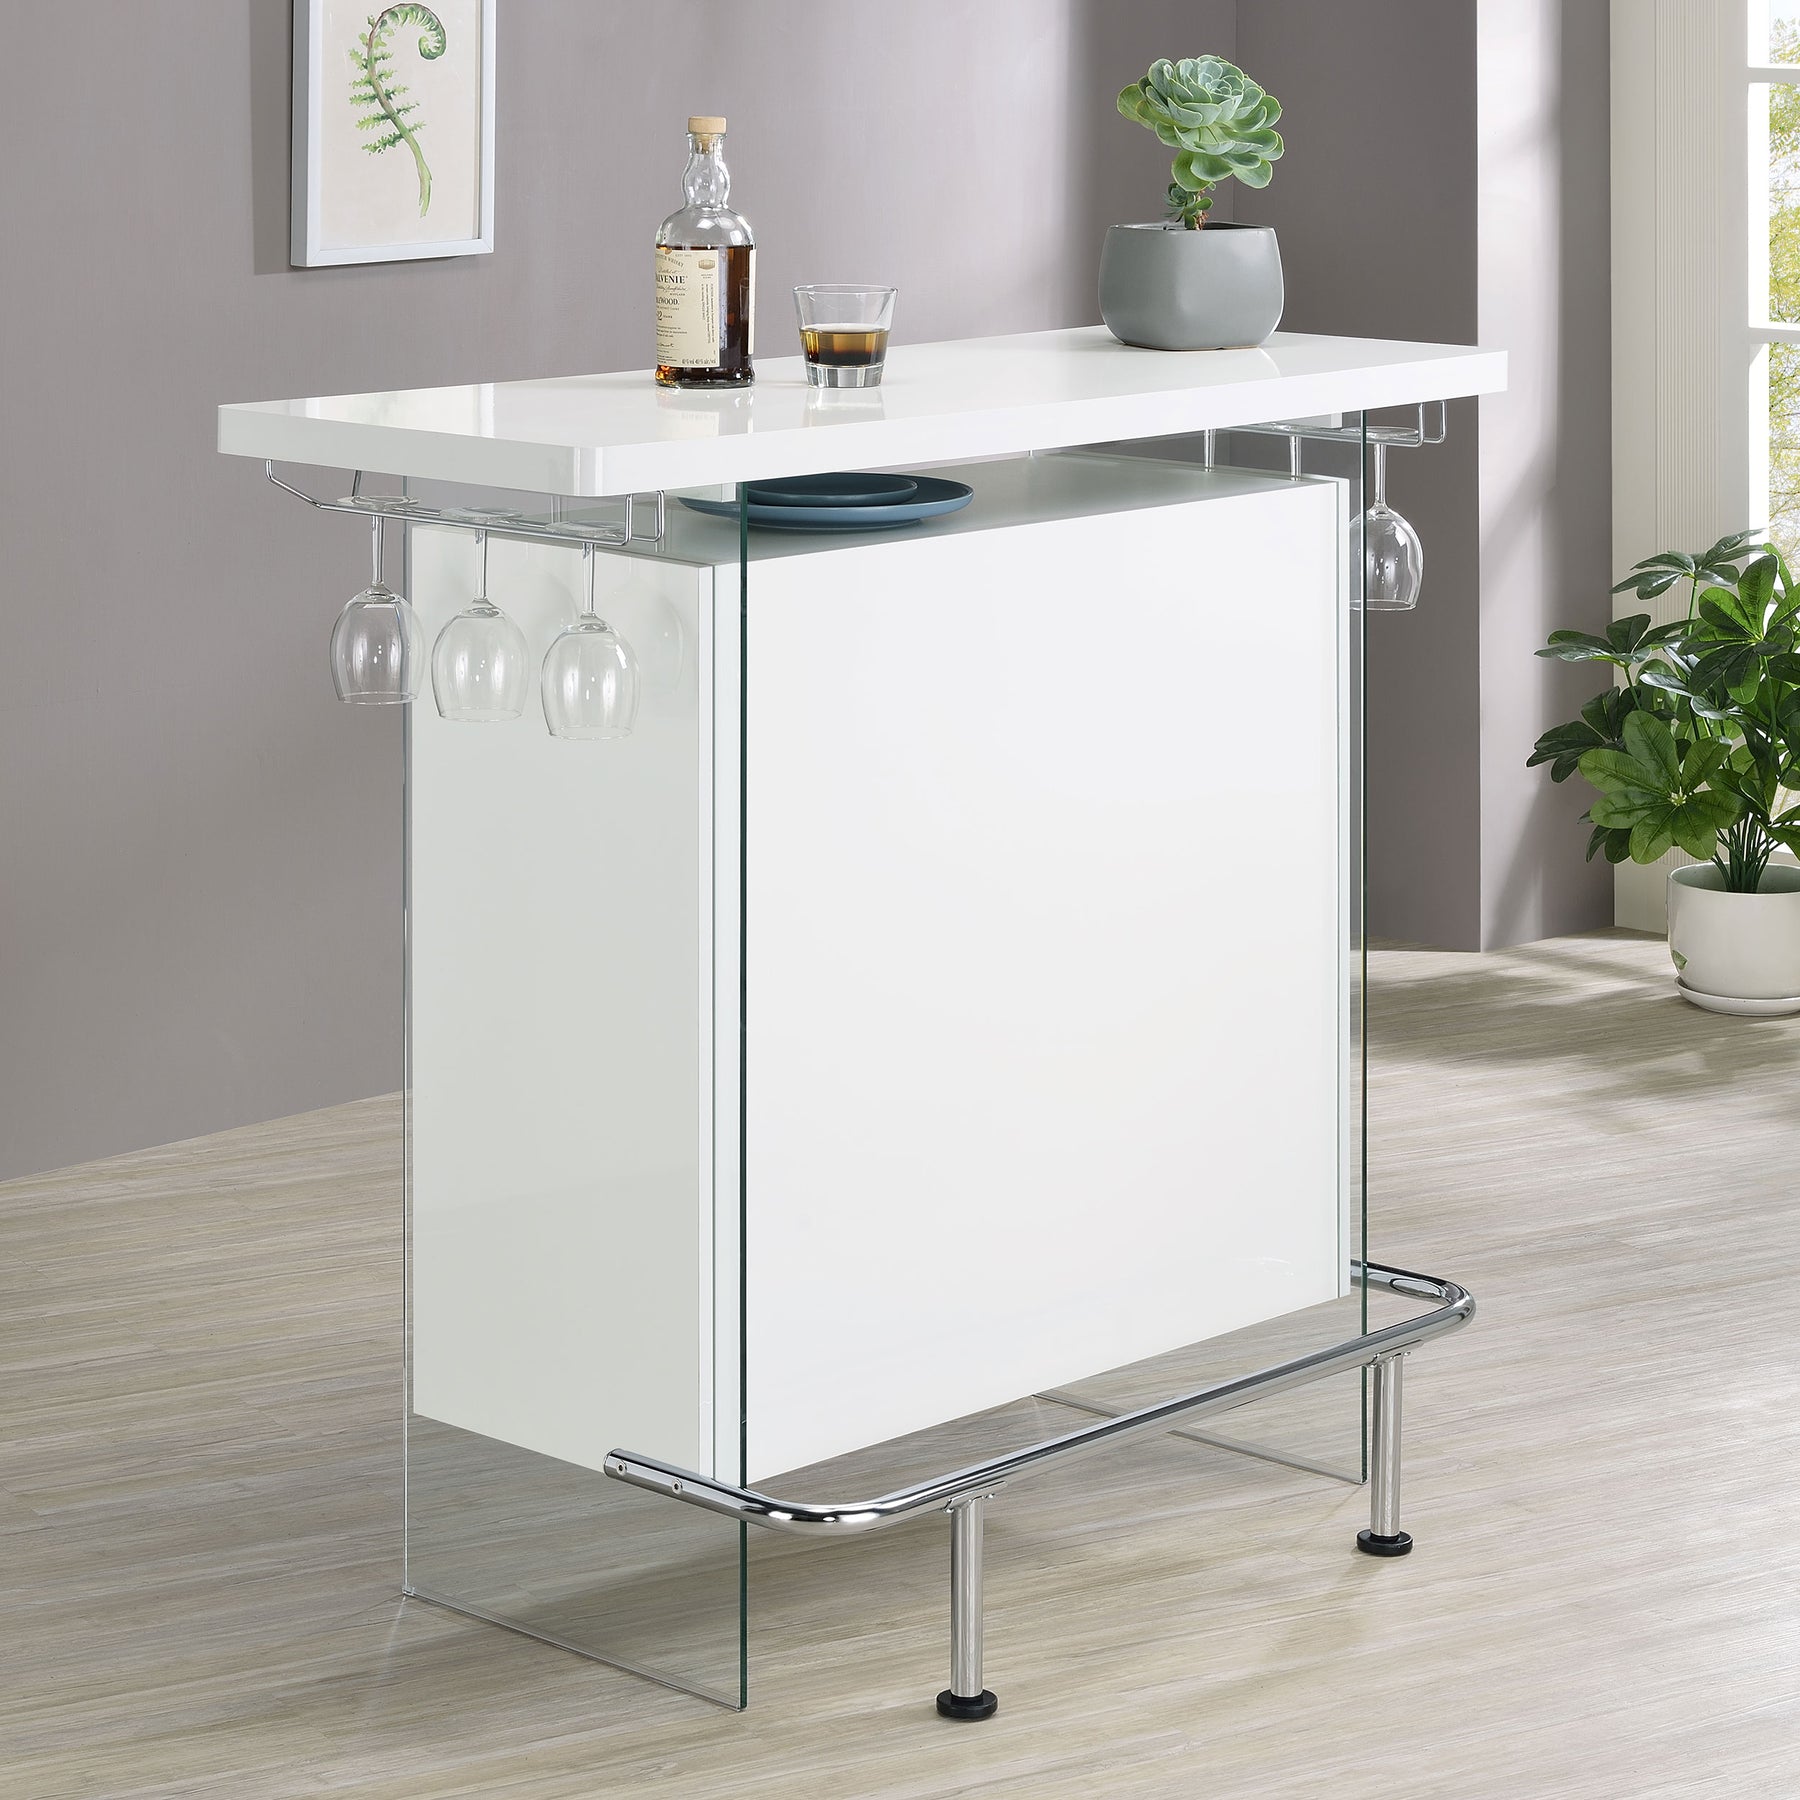 Acosta Rectangular Bar Unit with Footrest and Glass Side Panels Acosta Rectangular Bar Unit with Footrest and Glass Side Panels Half Price Furniture